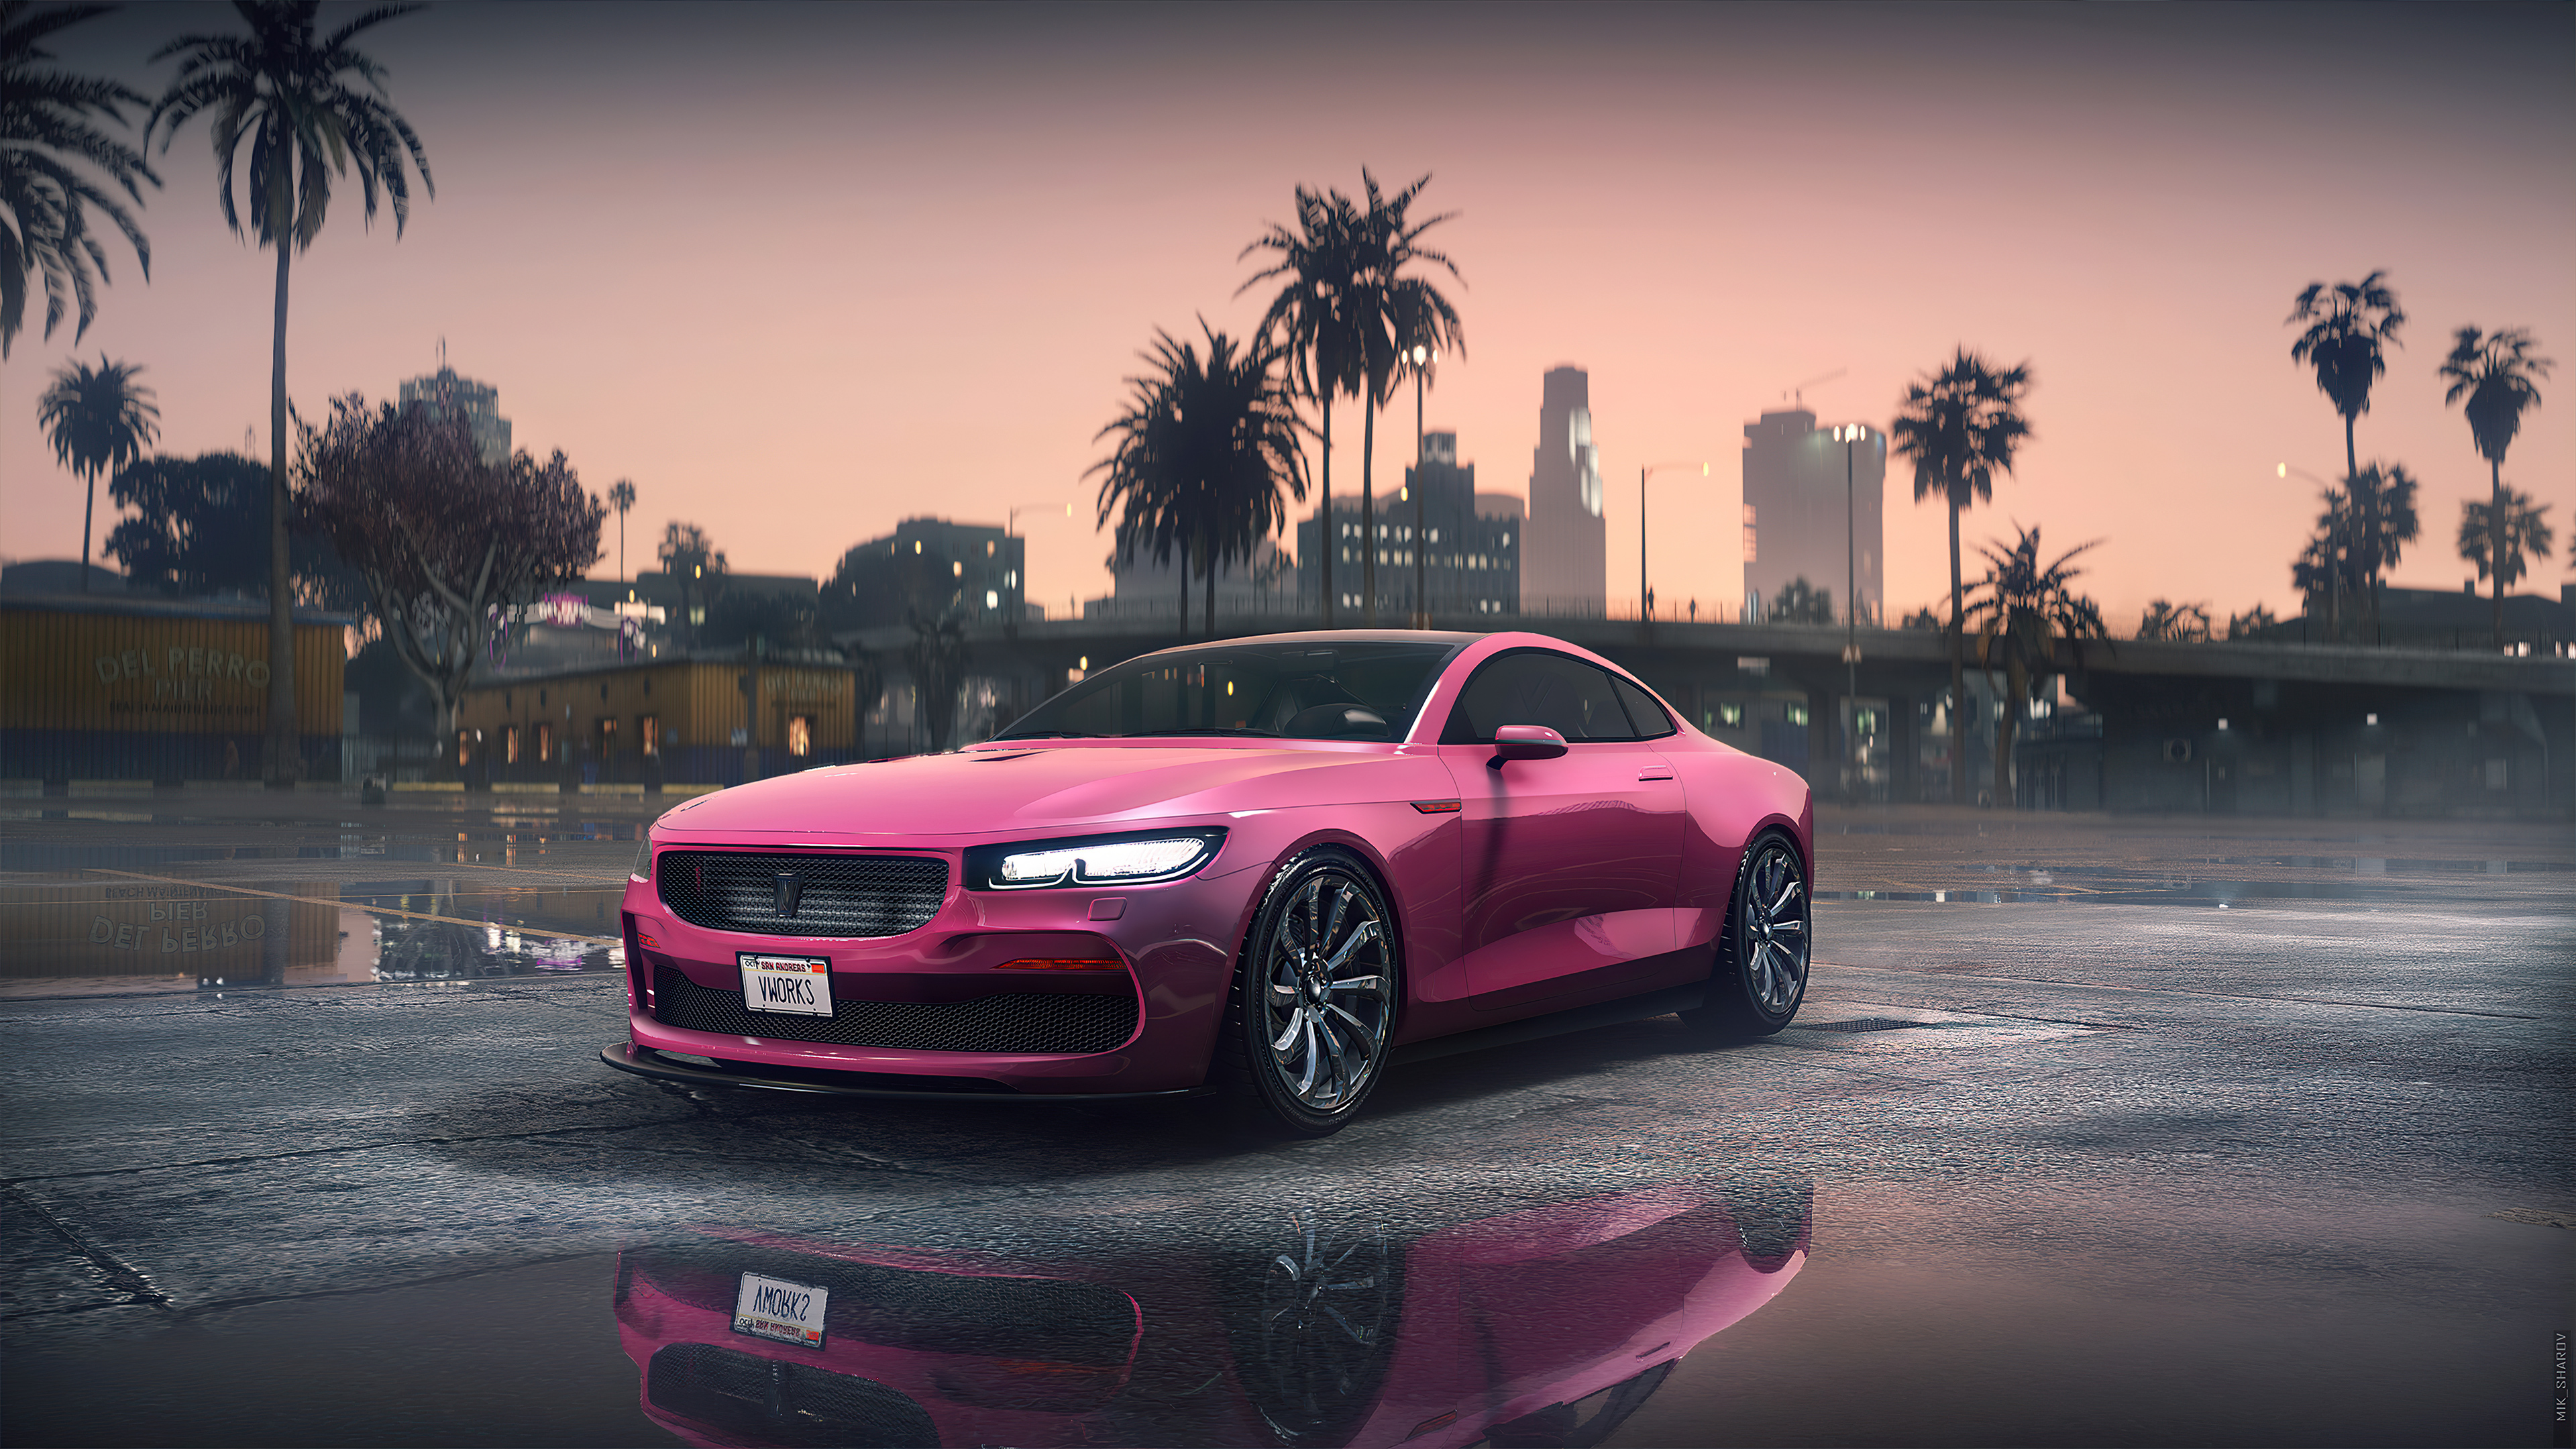 Vulcar Hachura R Gta 5 4k, HD Games, 4k Wallpapers, Images, Backgrounds,  Photos and Pictures